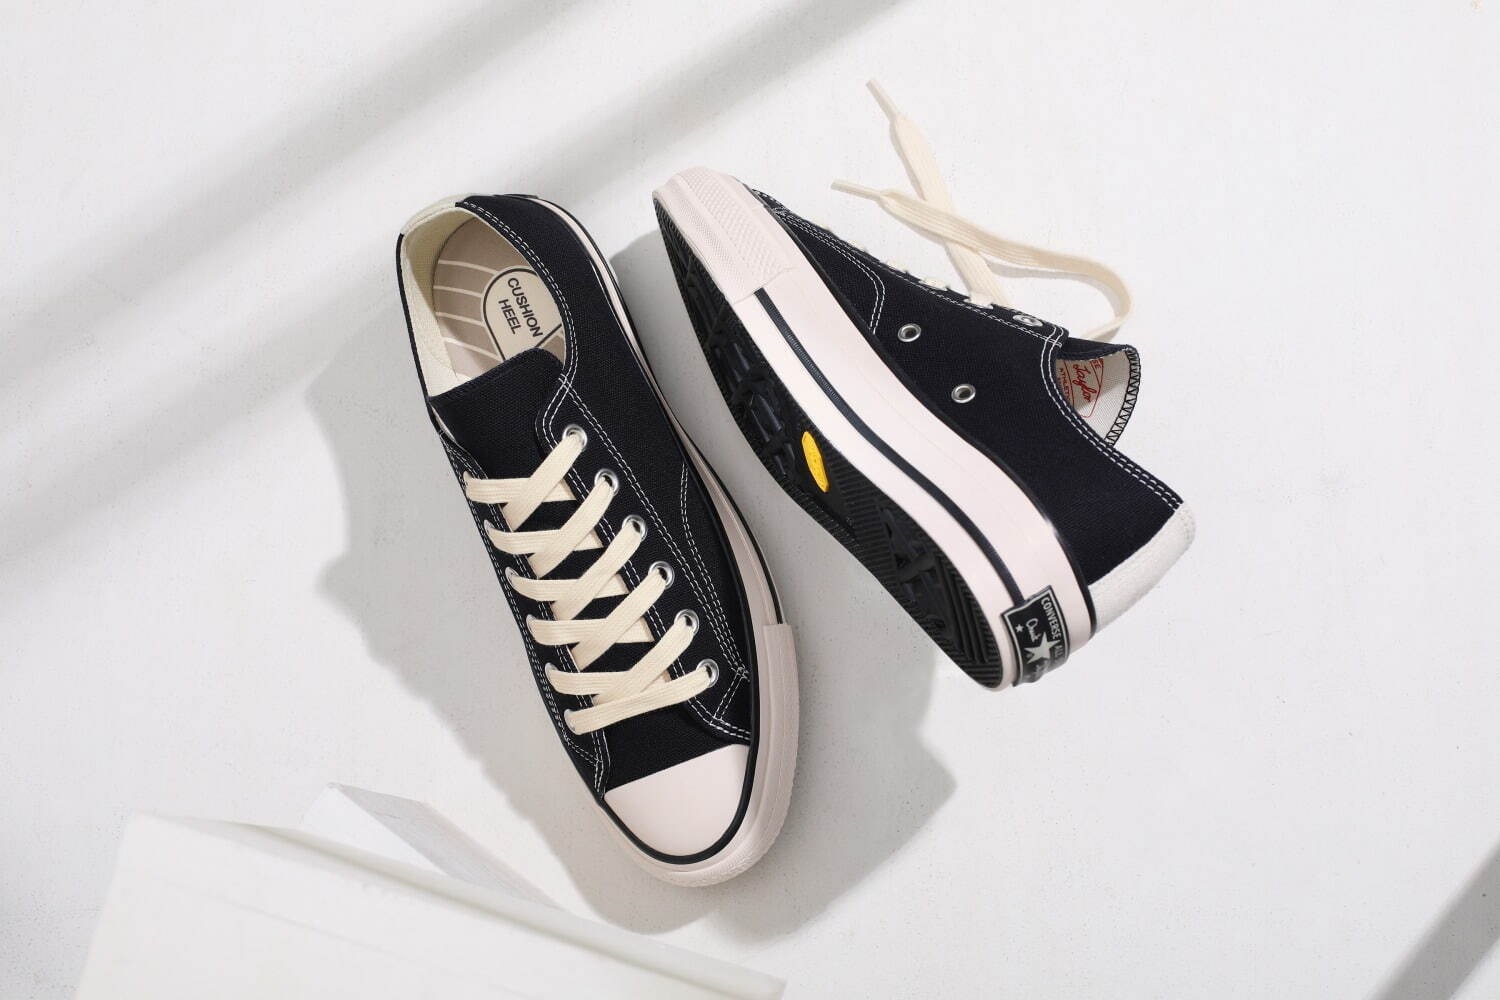 A product photo of Converse Japan's Vibram Chuck Taylor shoes